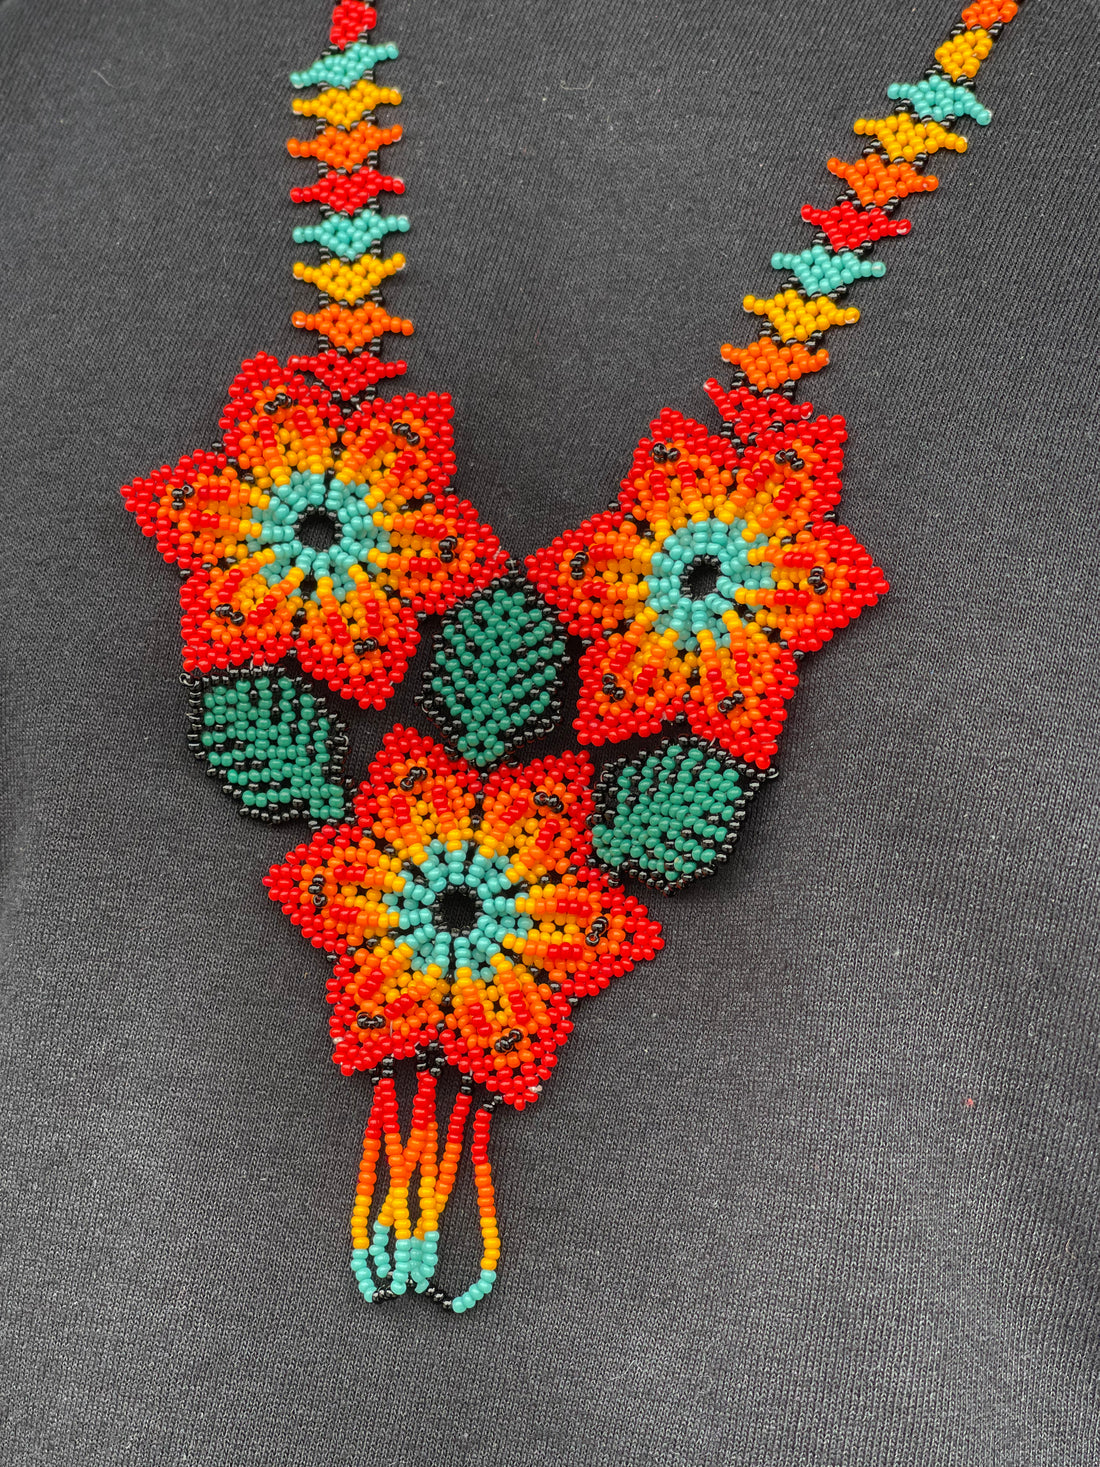 Floral Chaquira Necklace